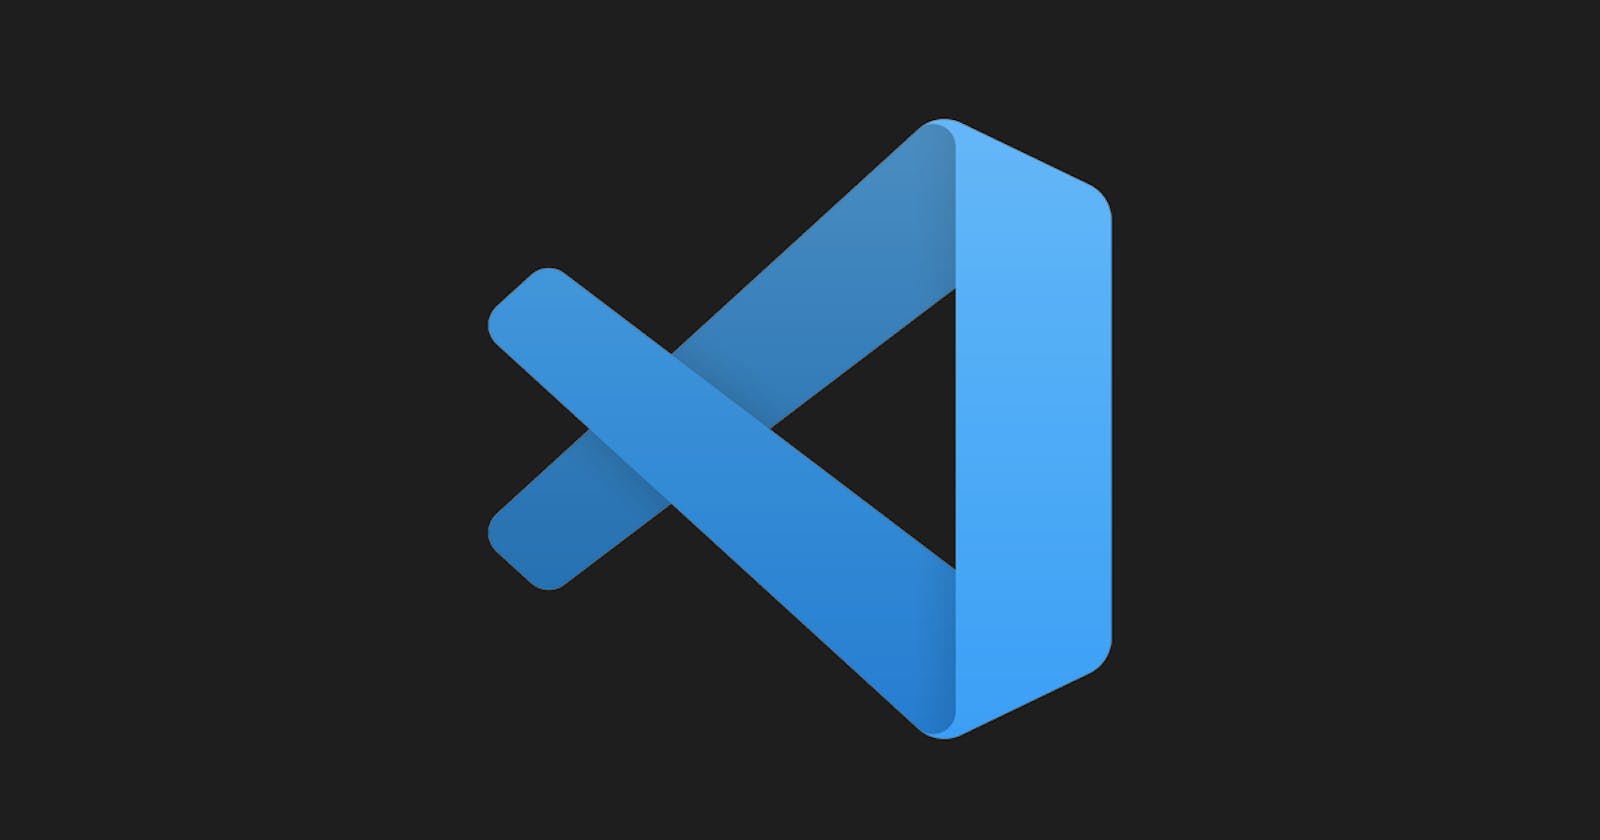 Working with HTTP Files in Visual Studio Code